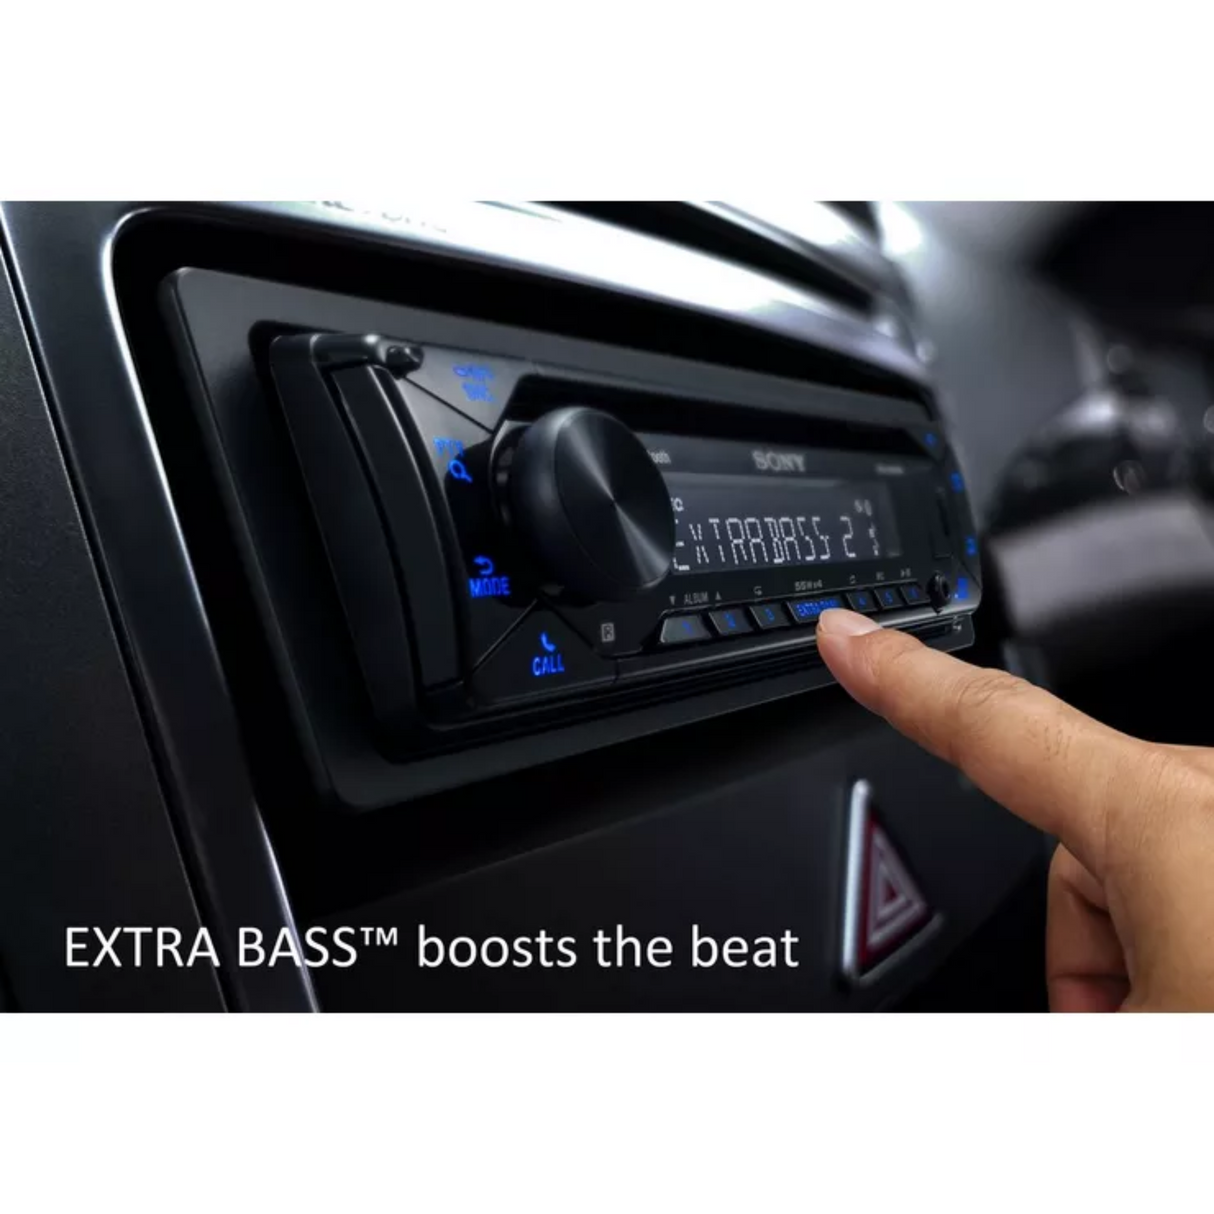 Bluetooth in Car Works for Phone Calls Not Audio in JVC Car Stereo